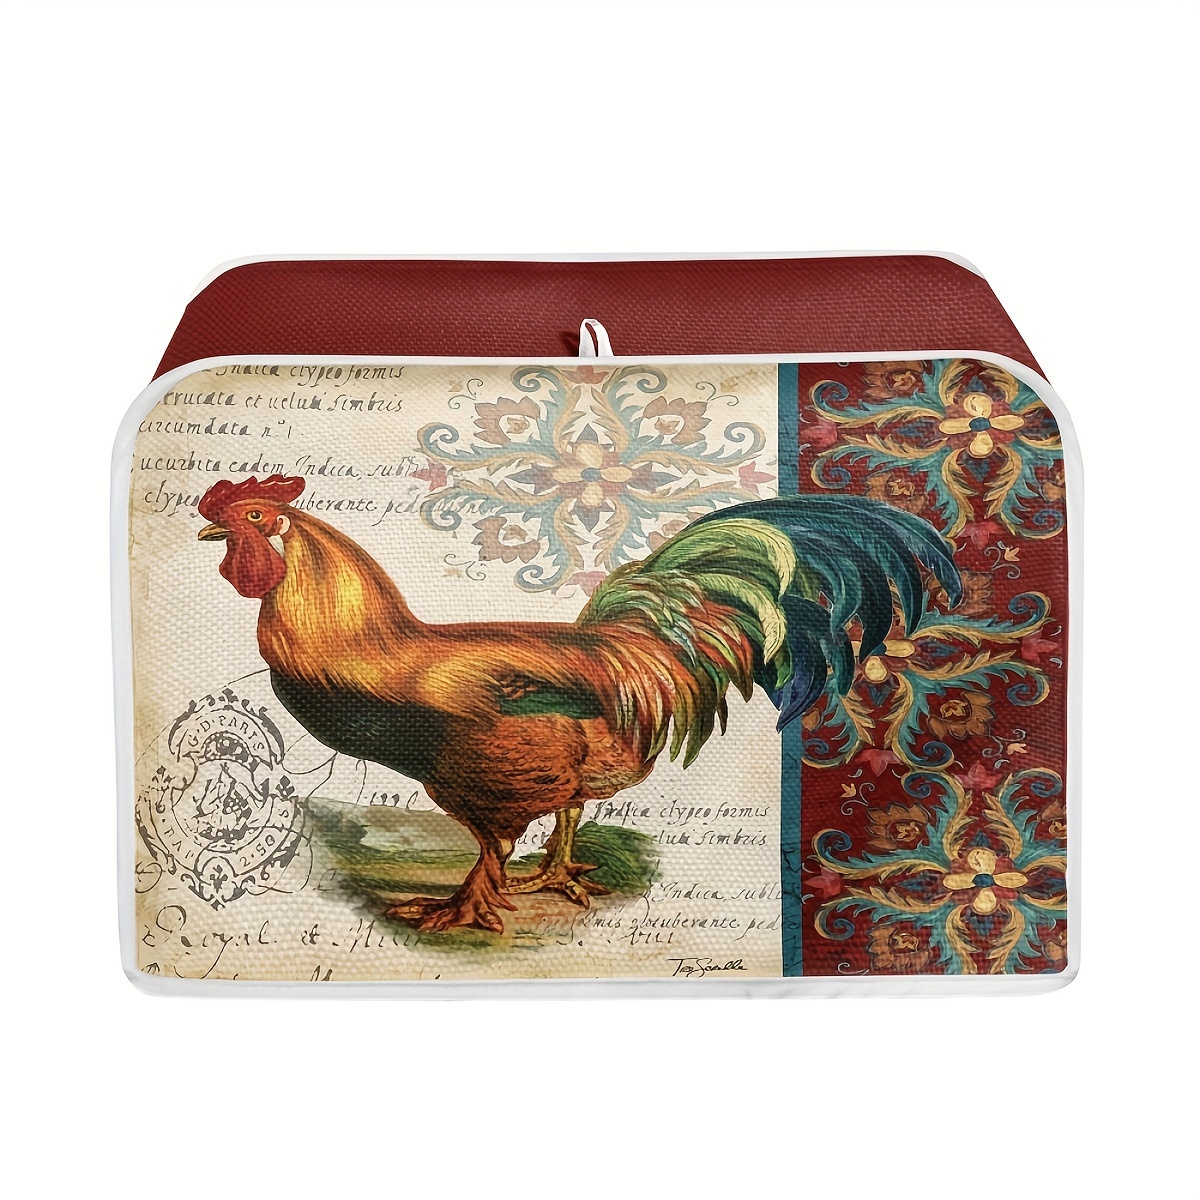 

2 Toaster Cover - Bread Toaster Oven Dust Proof Cover - Kitchen Small Appliance Cover, Broiler Appliance Organizer Bag, Anti Fingerprint Protection, Vintage Rooster